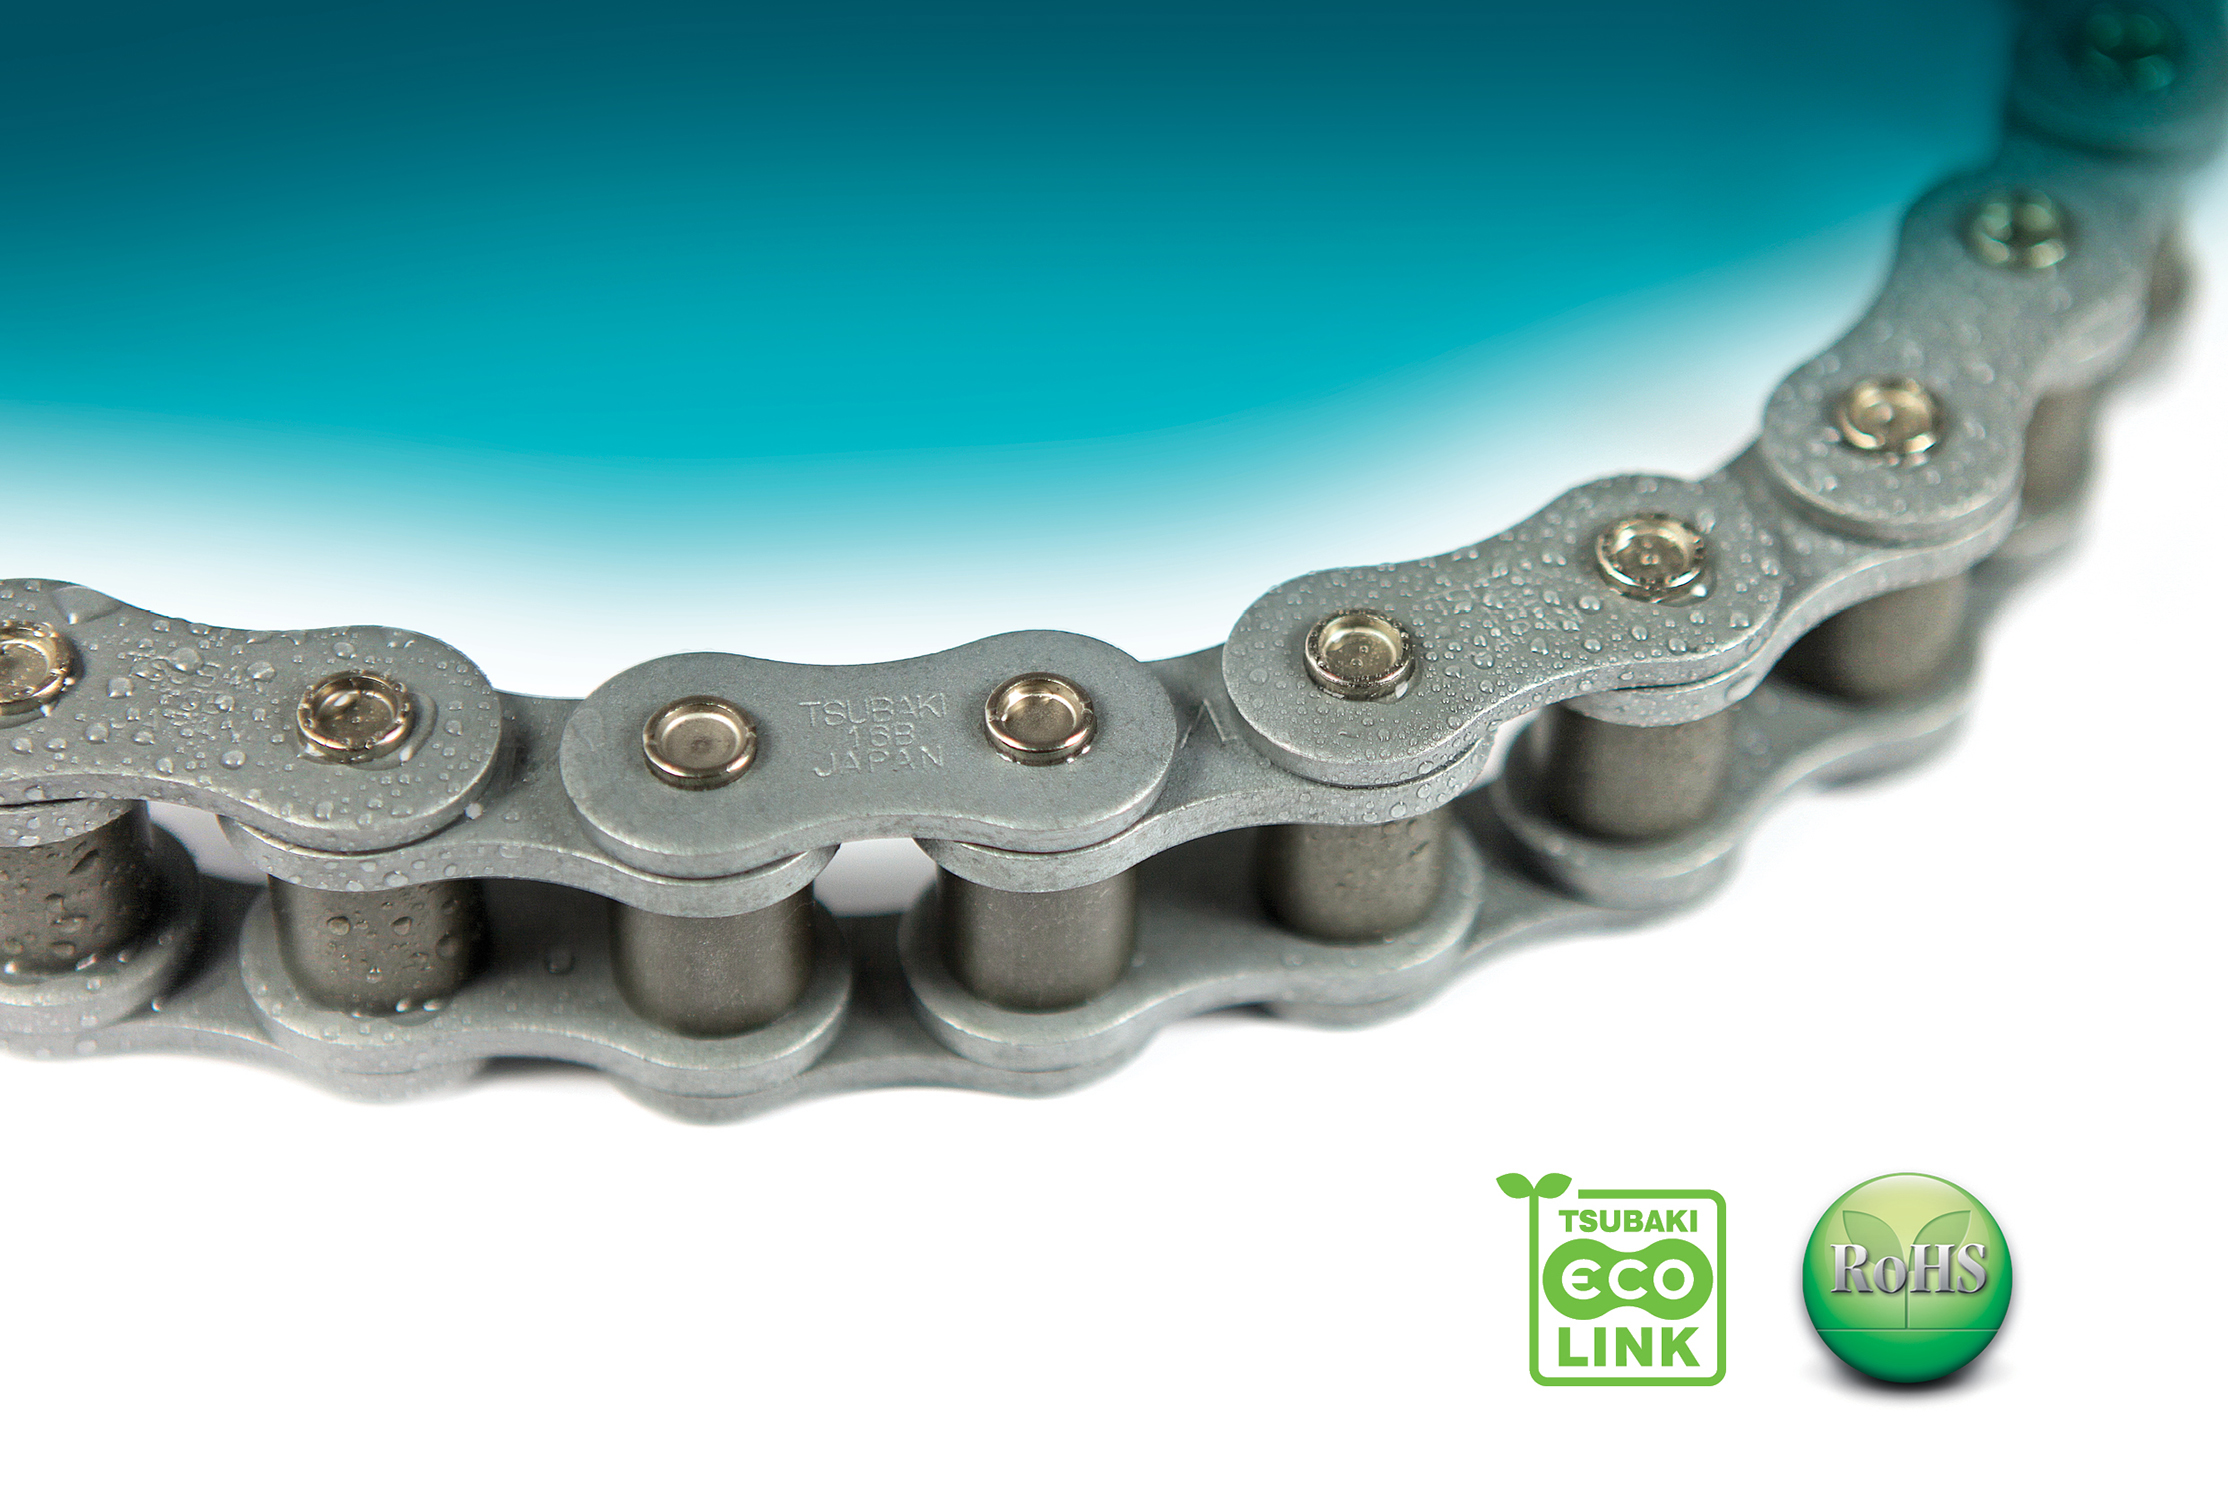 Eco & Eco products are already available in the full range of Tsubaki chains, including GT4 Winner, Lambda lube free chain, Neptune™ corrosion resistant chain and G8 Heavy Duty chain.